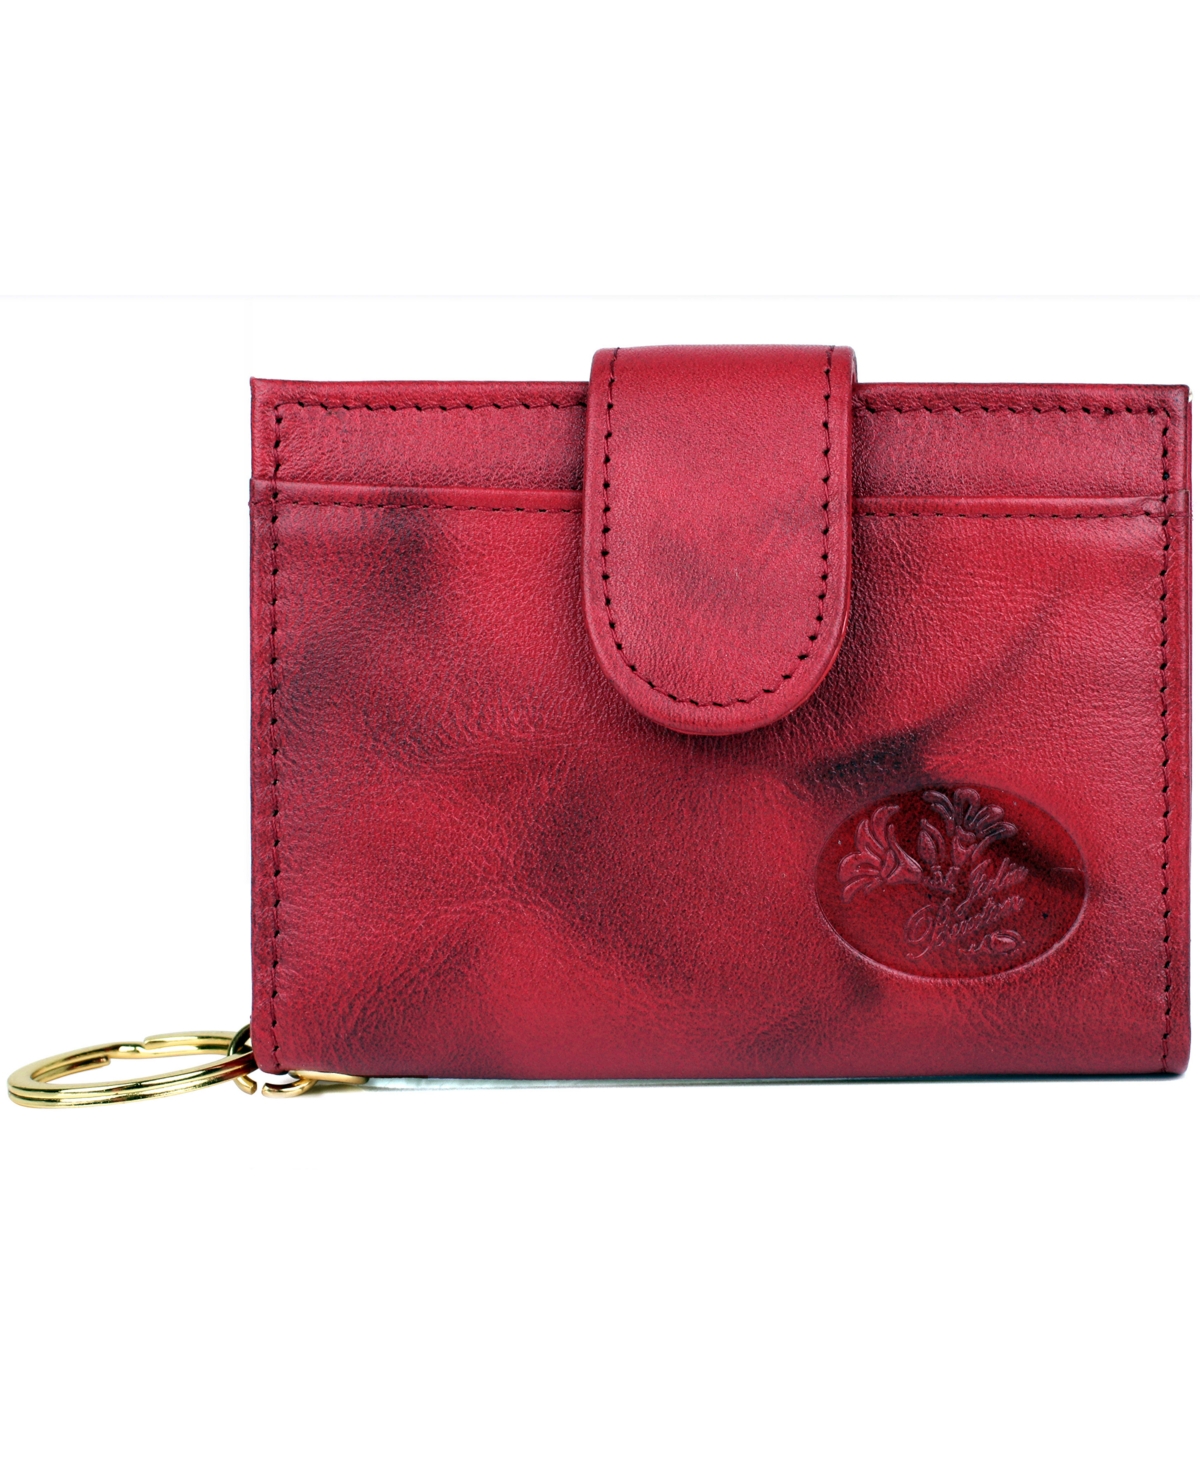 Julia Buxton Women's Heiress Pik-me-up Tab Card Case Wallet In Red